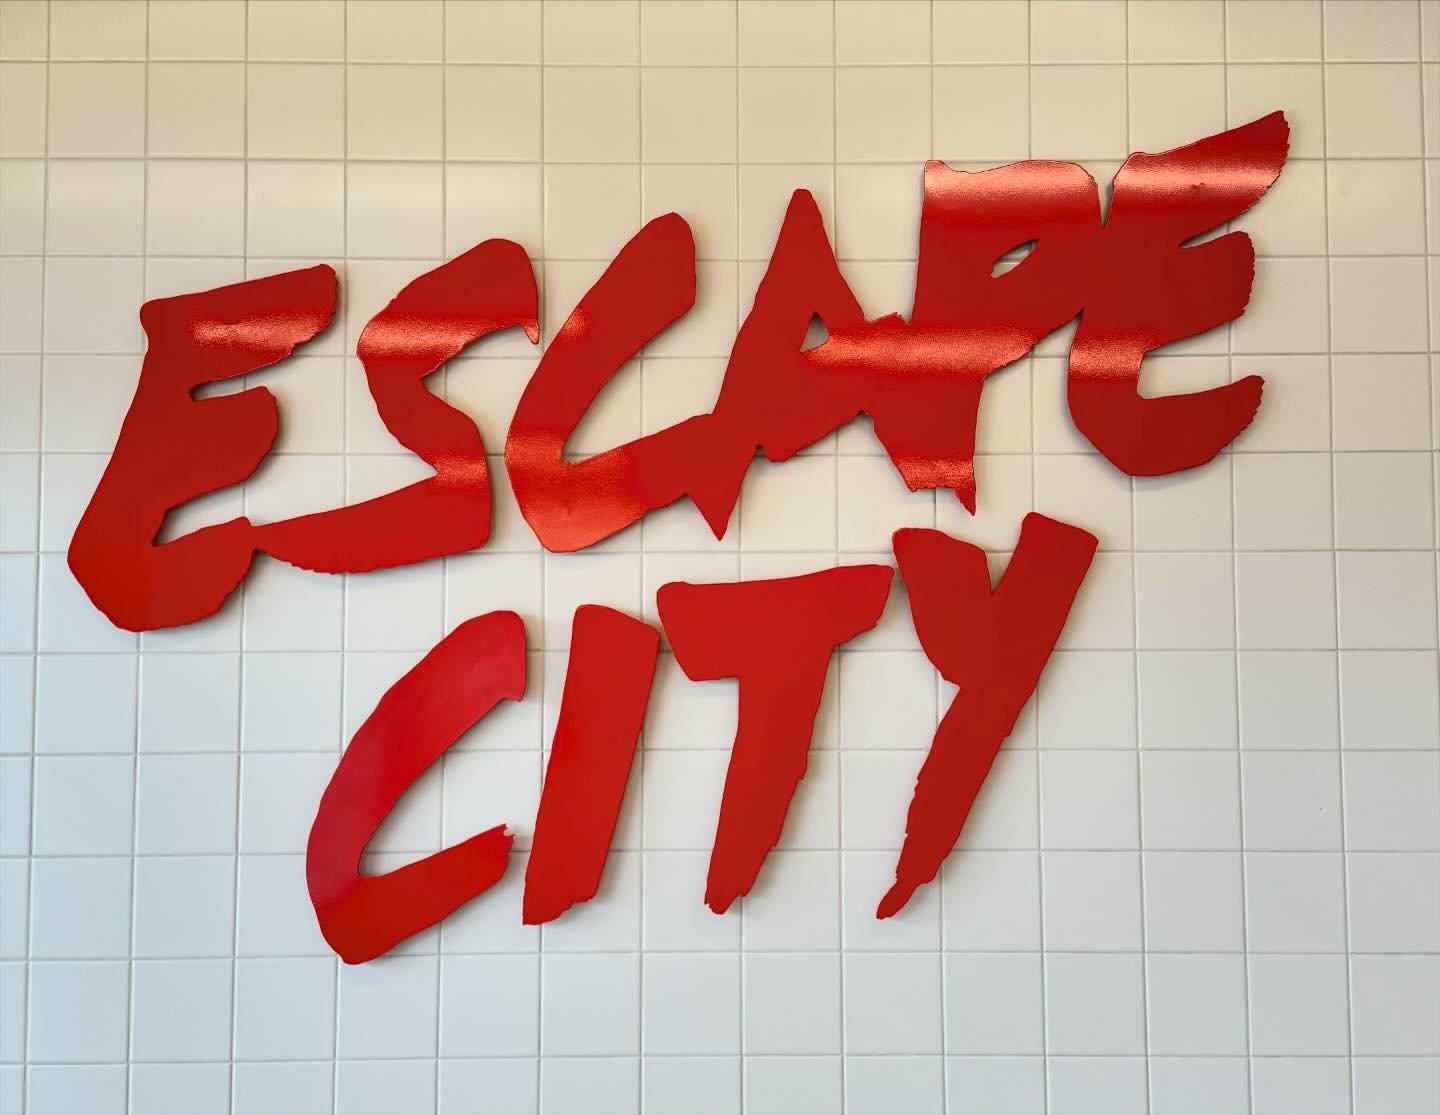 Had a quick 24 hours in Calgary visiting our client @escapecity.ca at their new location on Macleod Trail. If you live in Calgary and love fully immersive escape rooms, you MUST visit Escape City with a group of friends!